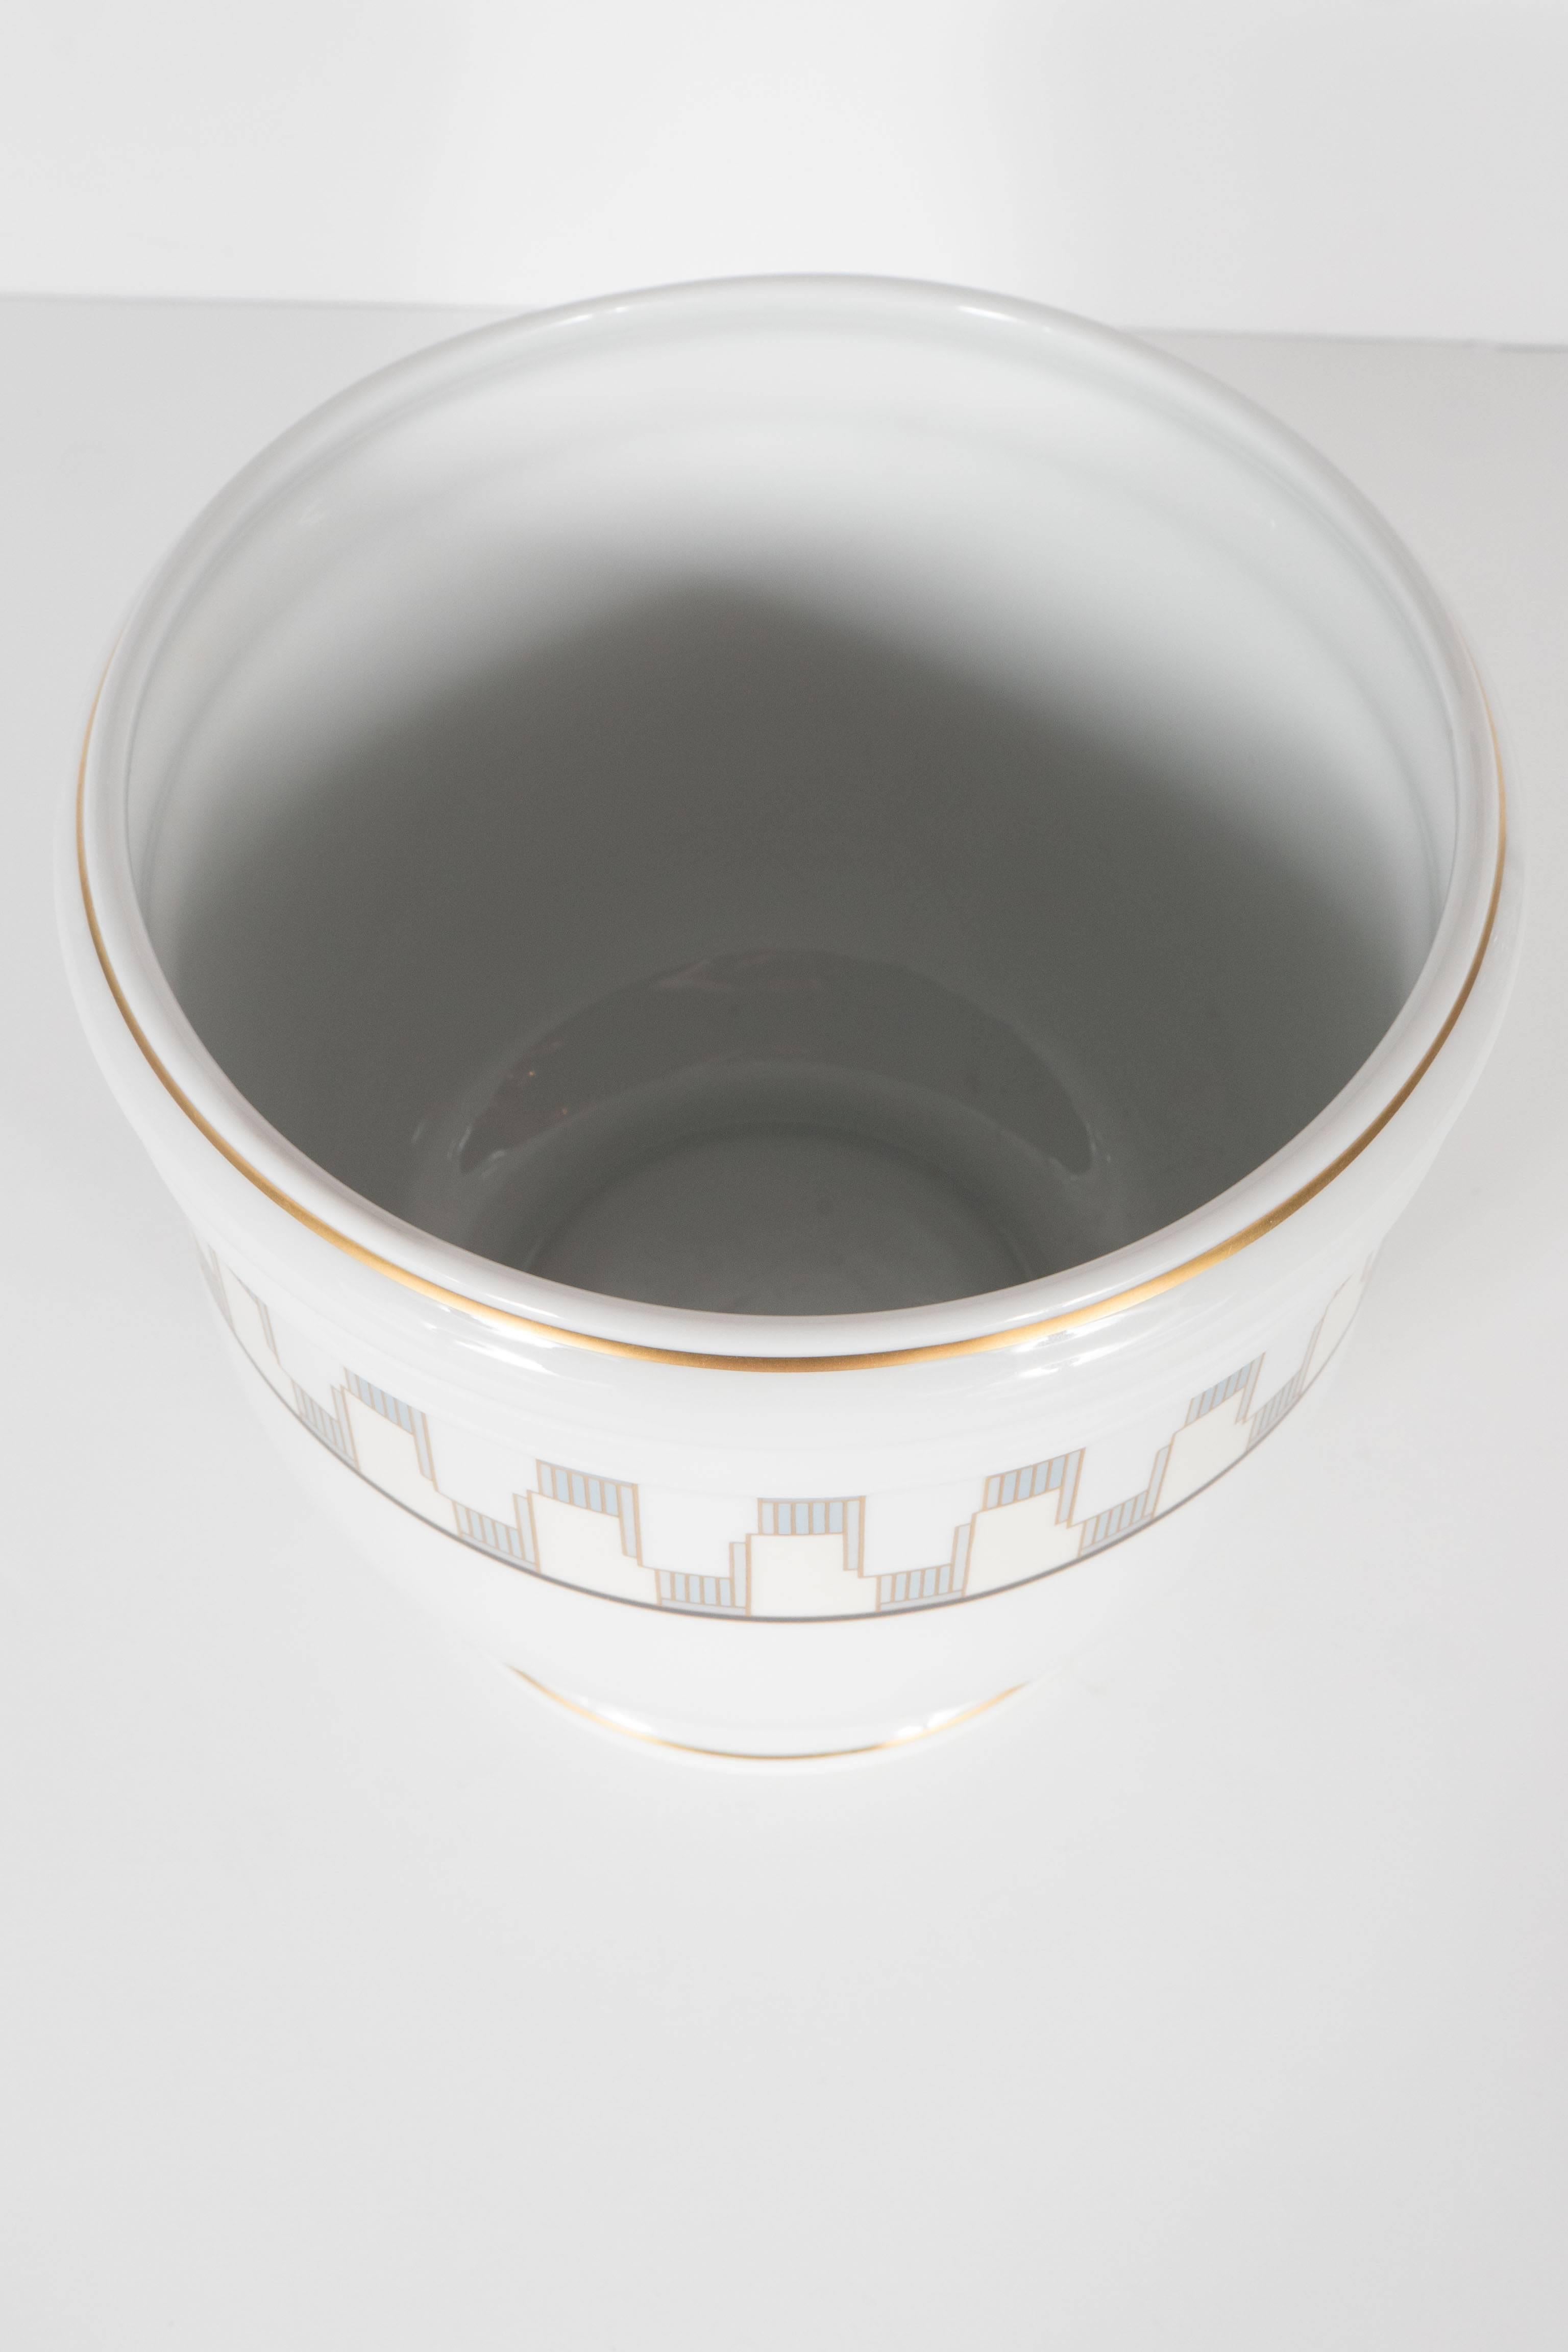 Fabricated from lustrous Limoges china, this gorgeous cachepot features an Art Deco cubist geometric pattern in hues of pale citrine, creme and pale grey. The lip and the base are accented with rings of 24-karat yellow gold gilt. It bears the mark